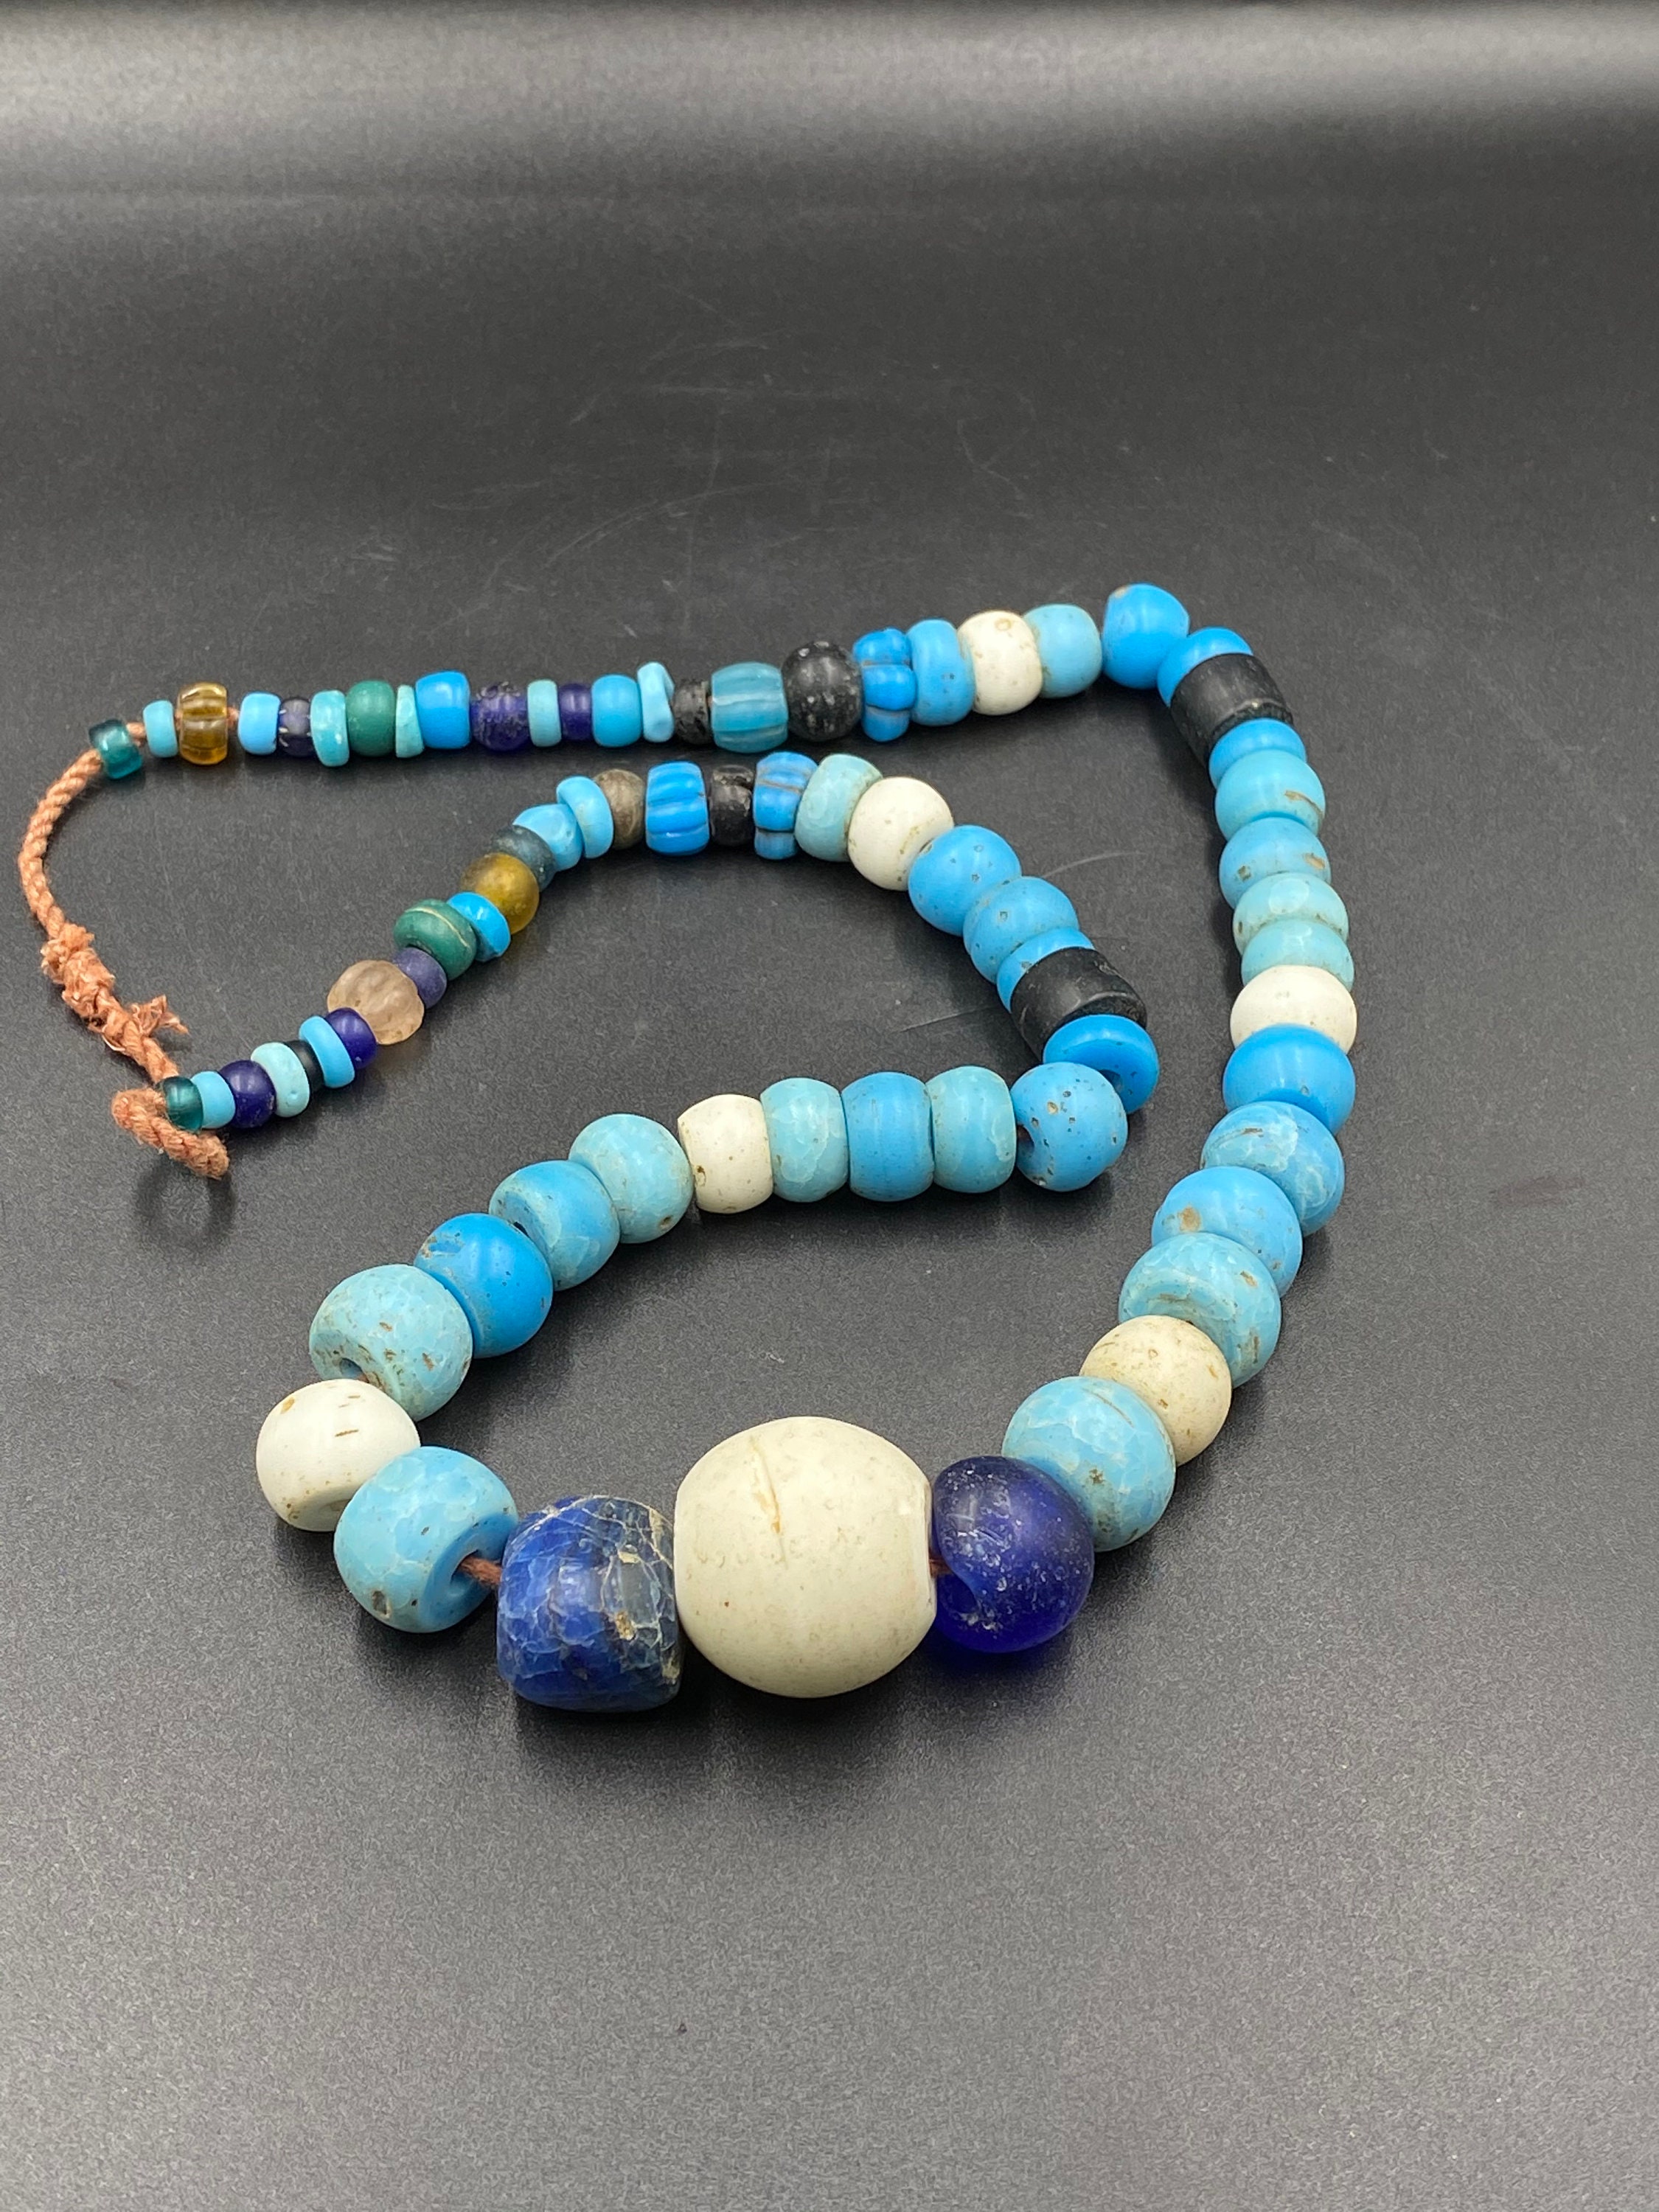 Old Himalayan Ancient Antique Naga Glass Beads Necklace From - Etsy